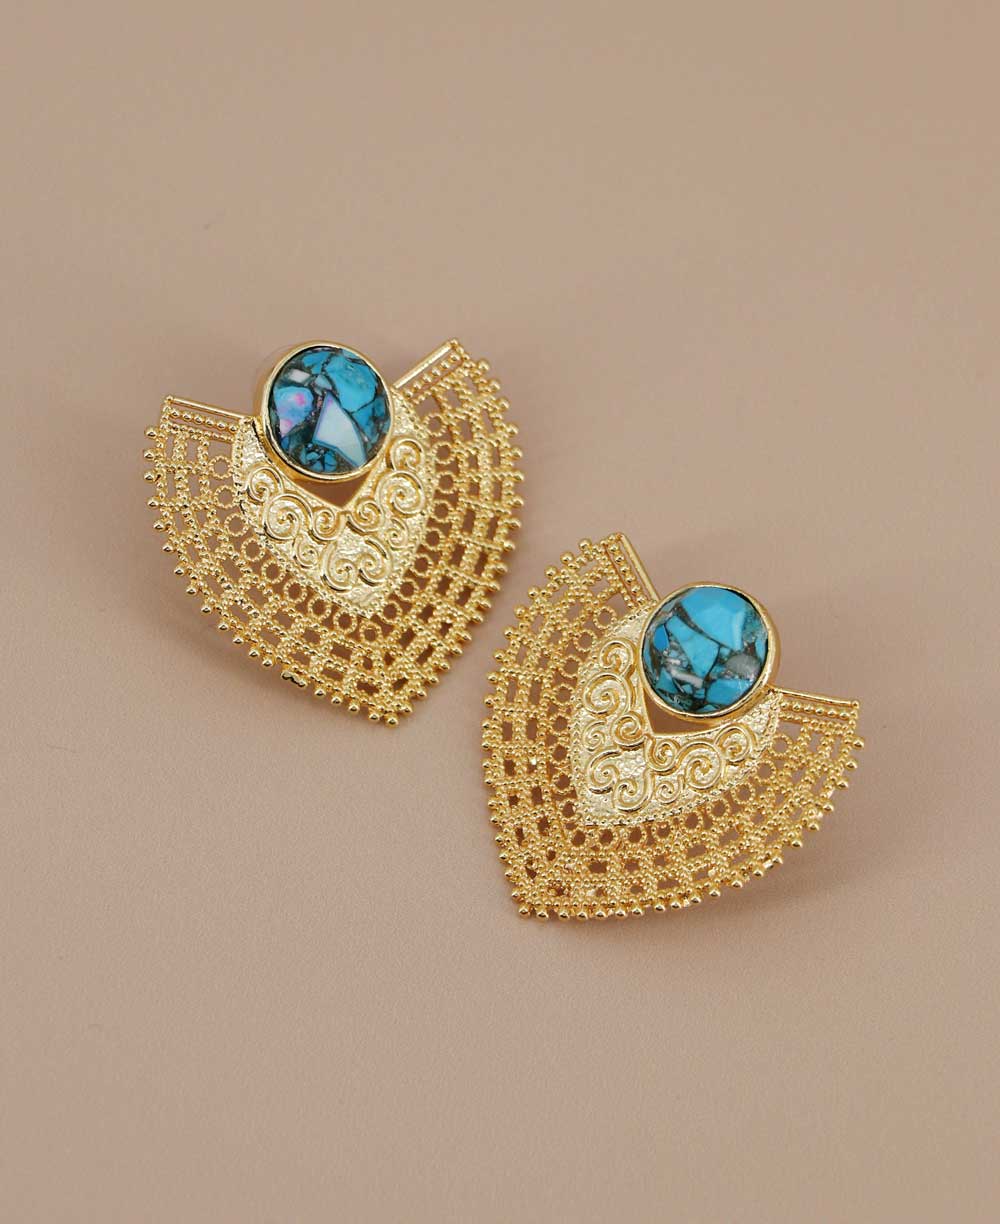 Gold plated petal earrings with turquoise stone